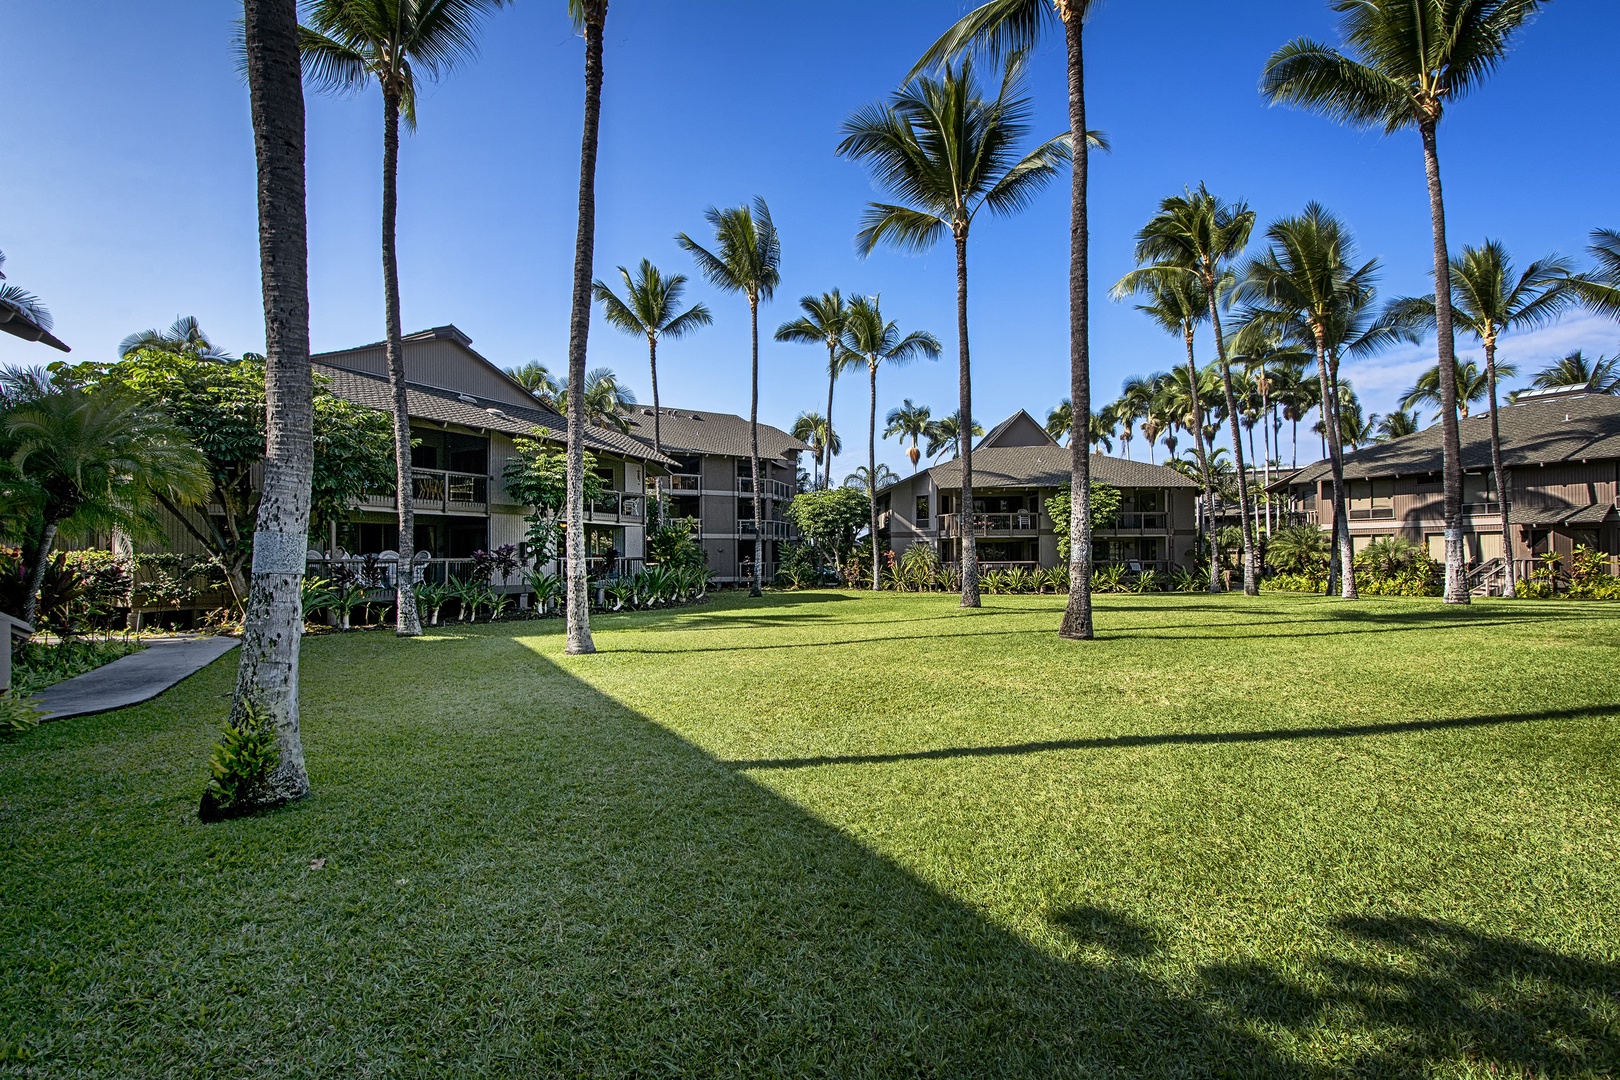 Kailua Kona Vacation Rentals, Kanaloa at Kona 701 - This condominium is situated on the fairway of the Kona Country Club and just a short walk to the renowned Sam Choy restaurant. Kanaloa has everything you desire for your dream Hawaiian vacation stay.